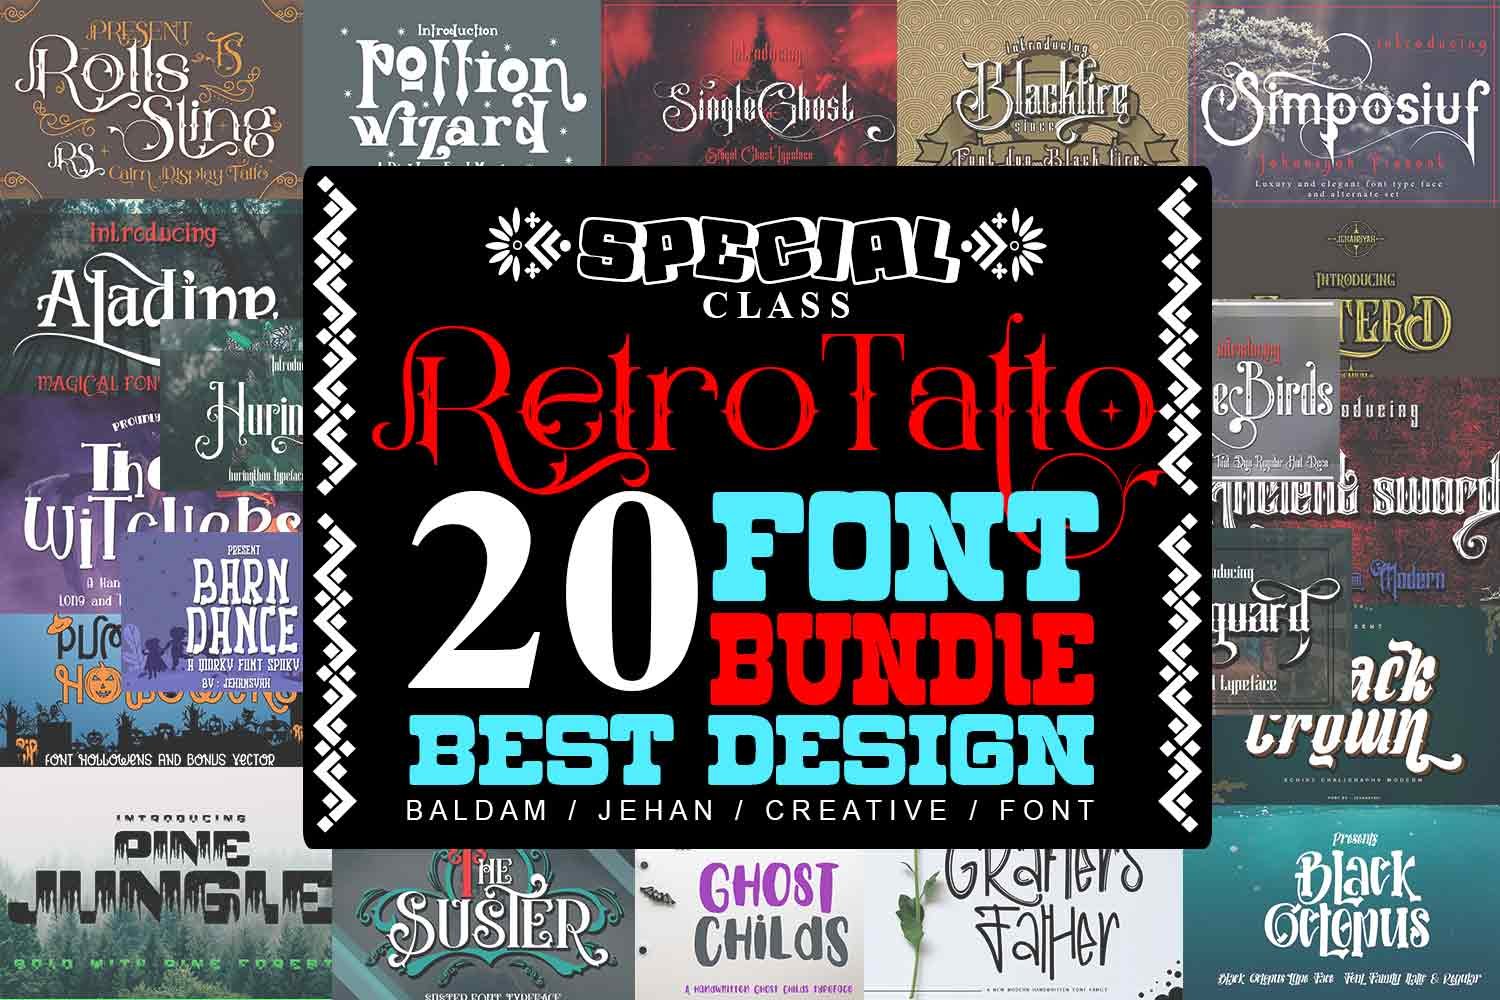 Special Collection 20 Font Bundle cover image.